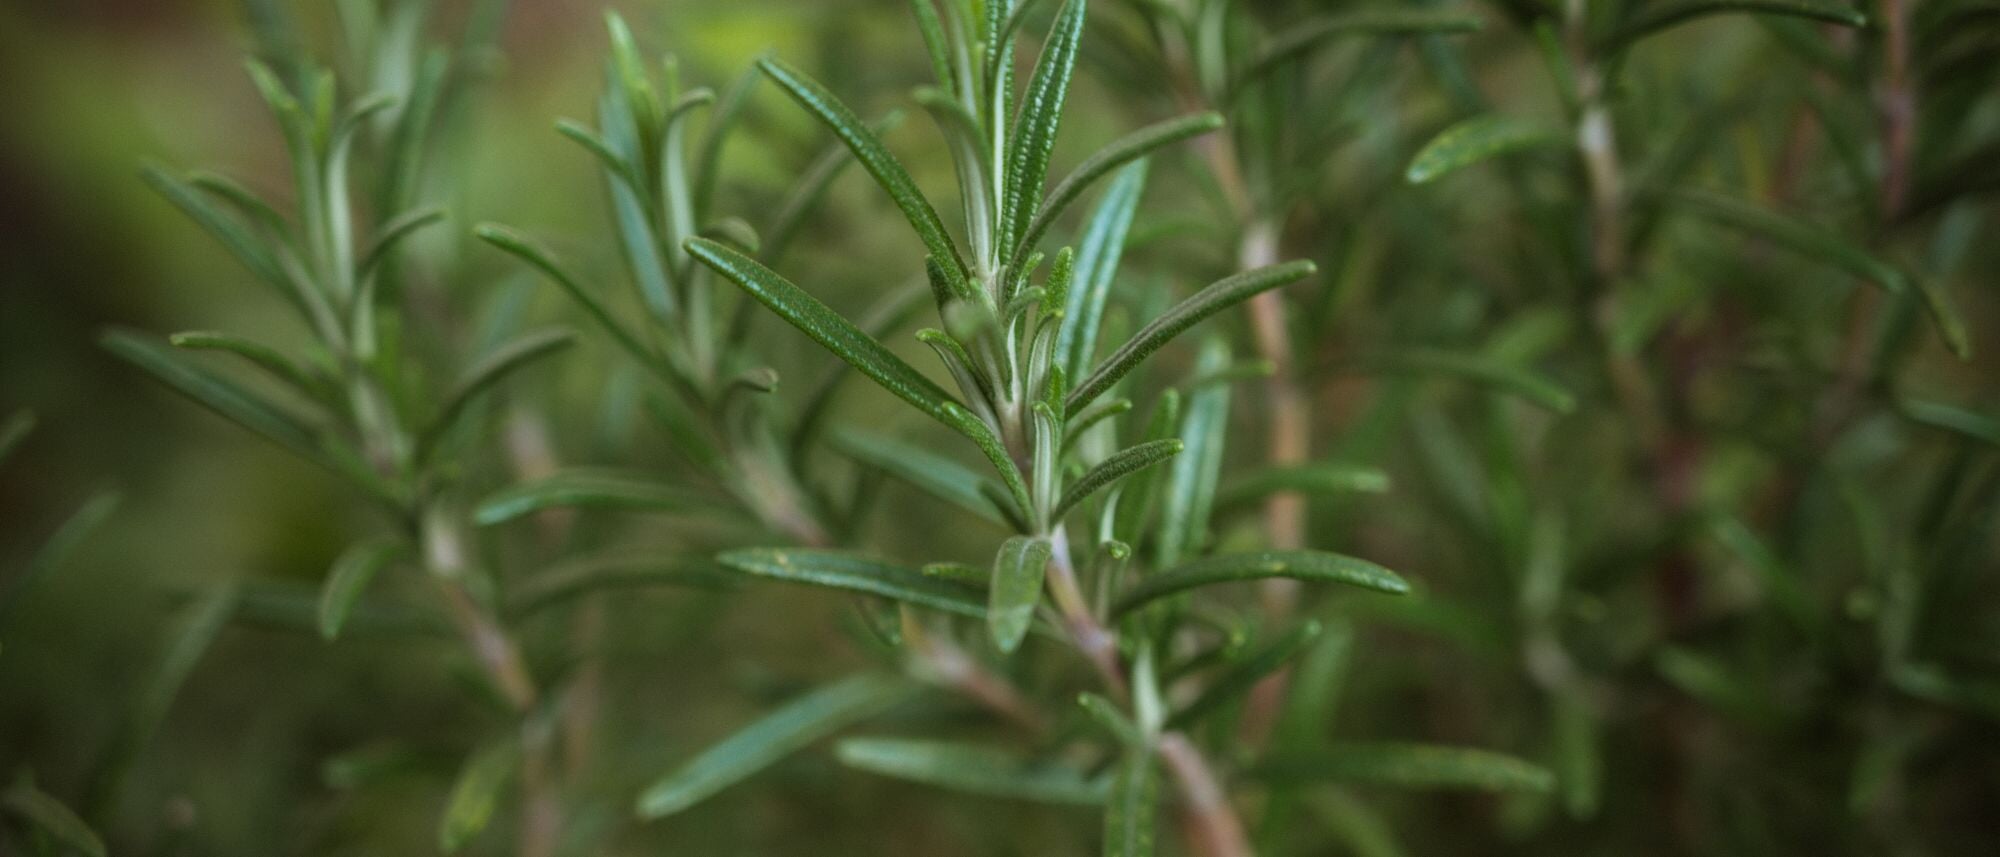 Grow rosemary in your home herb garden to add to your favorite dishes